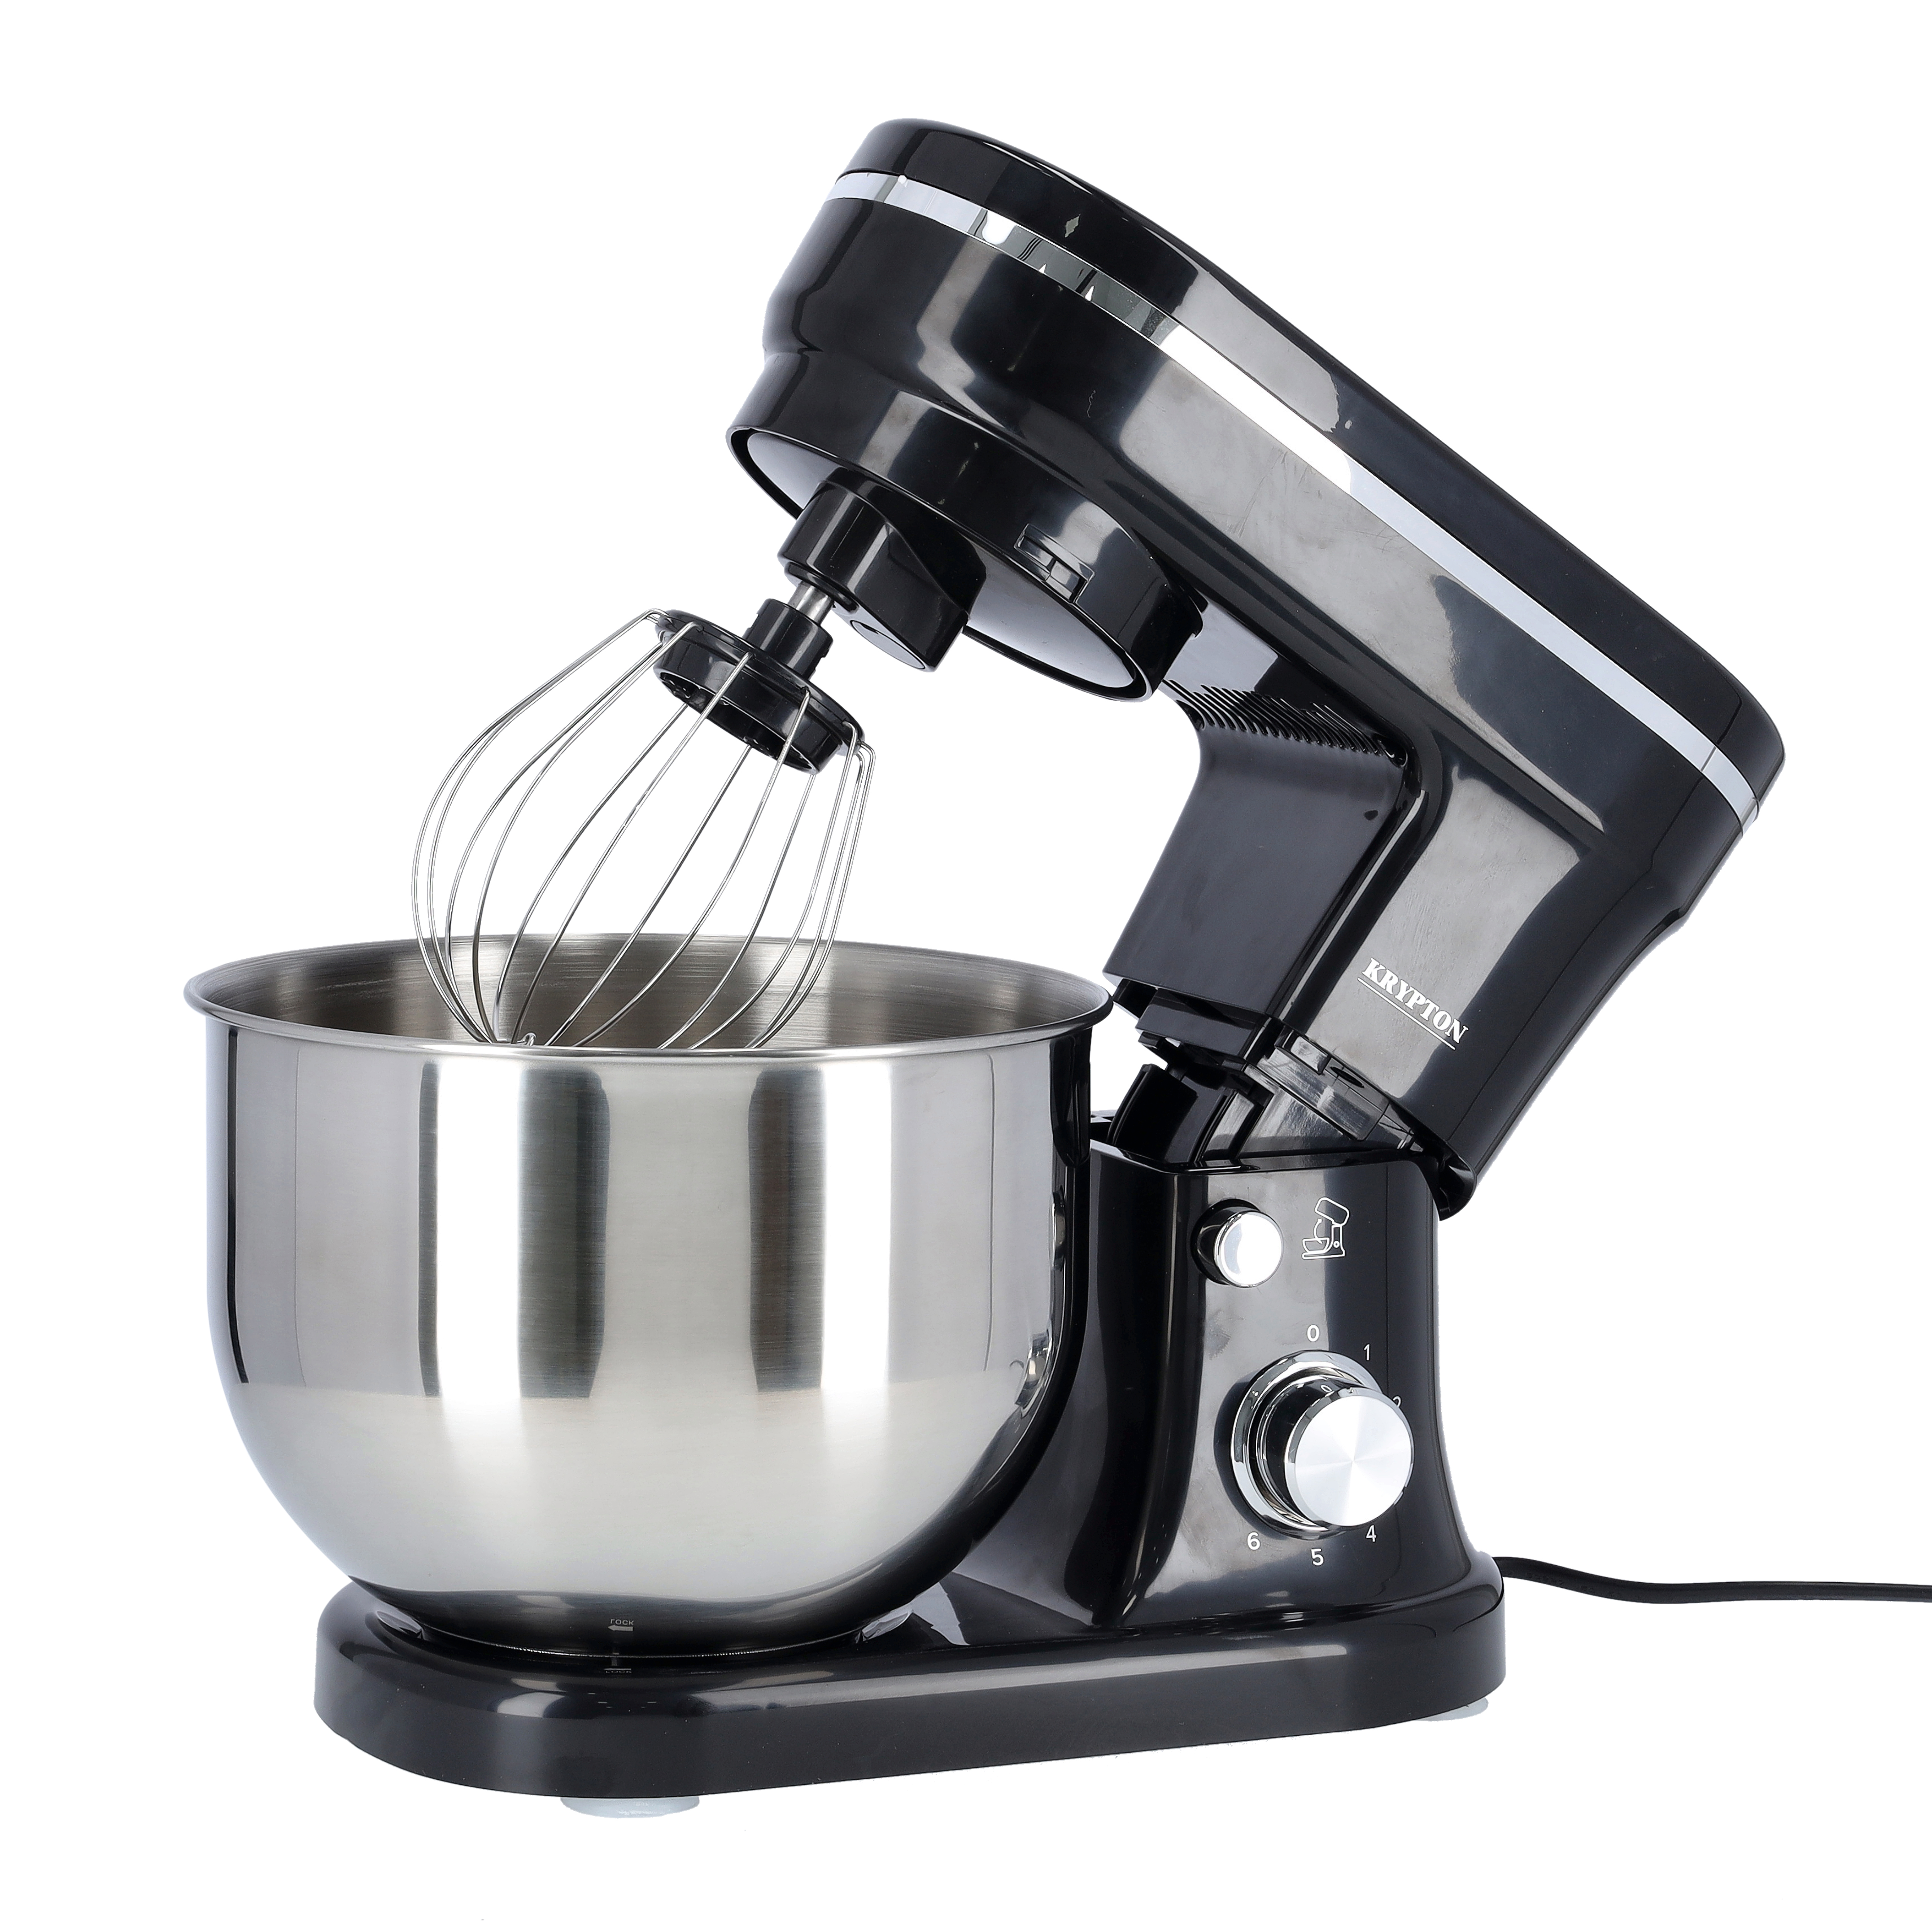 6 Speed Tilt-Head Kitchen Electric Mixer Whisk Salad Dough Hook Cake Nestling 5L 800W Stand Mixer with Mixing Bowl Beater for Wheaten Food 